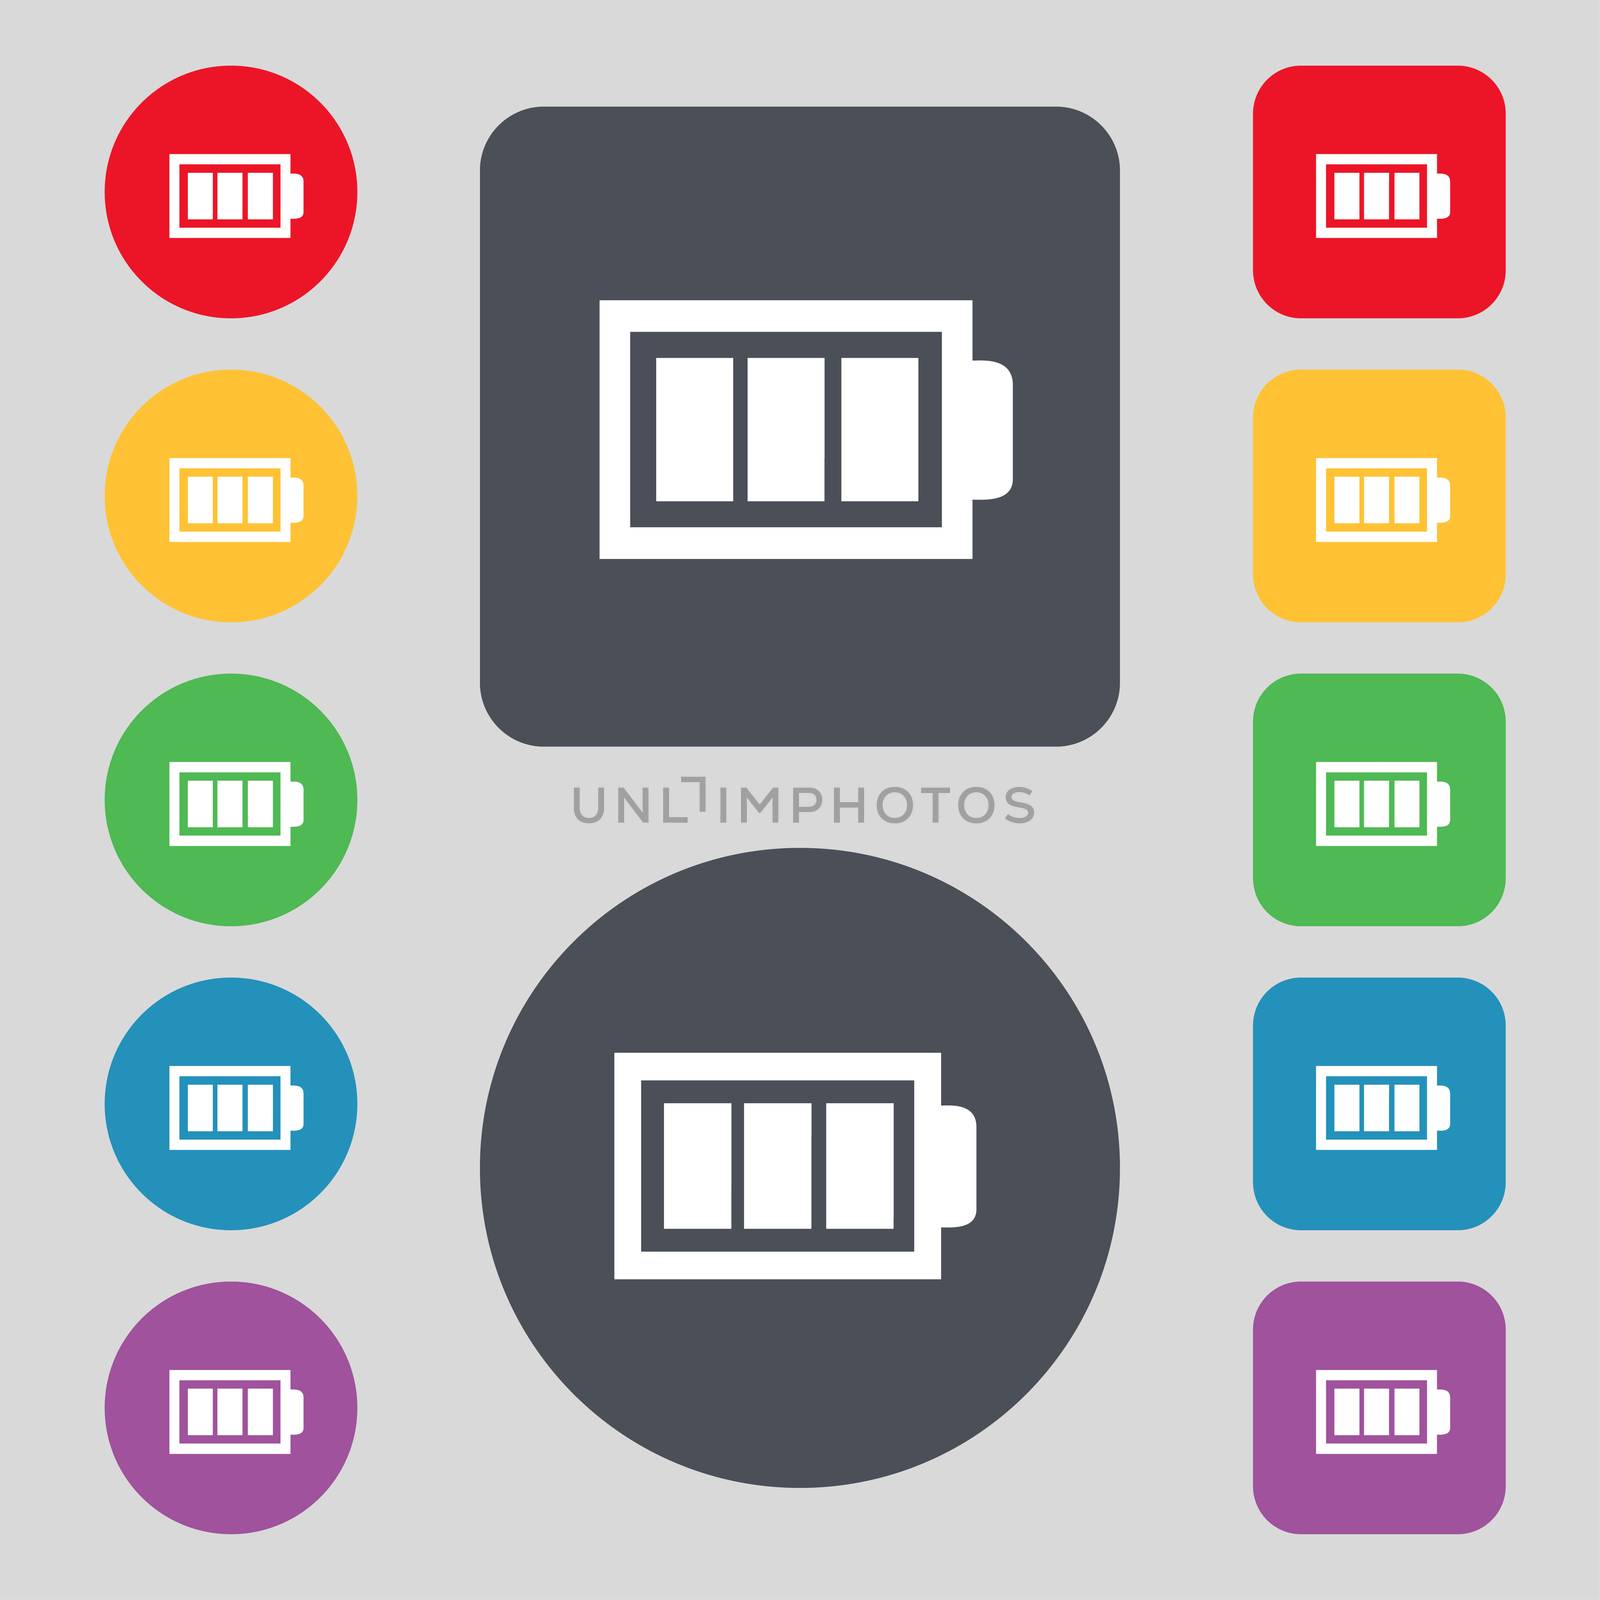 Battery fully charged sign icon. Electricity symbol. Set of colour buttons. Modern interface website button illustration